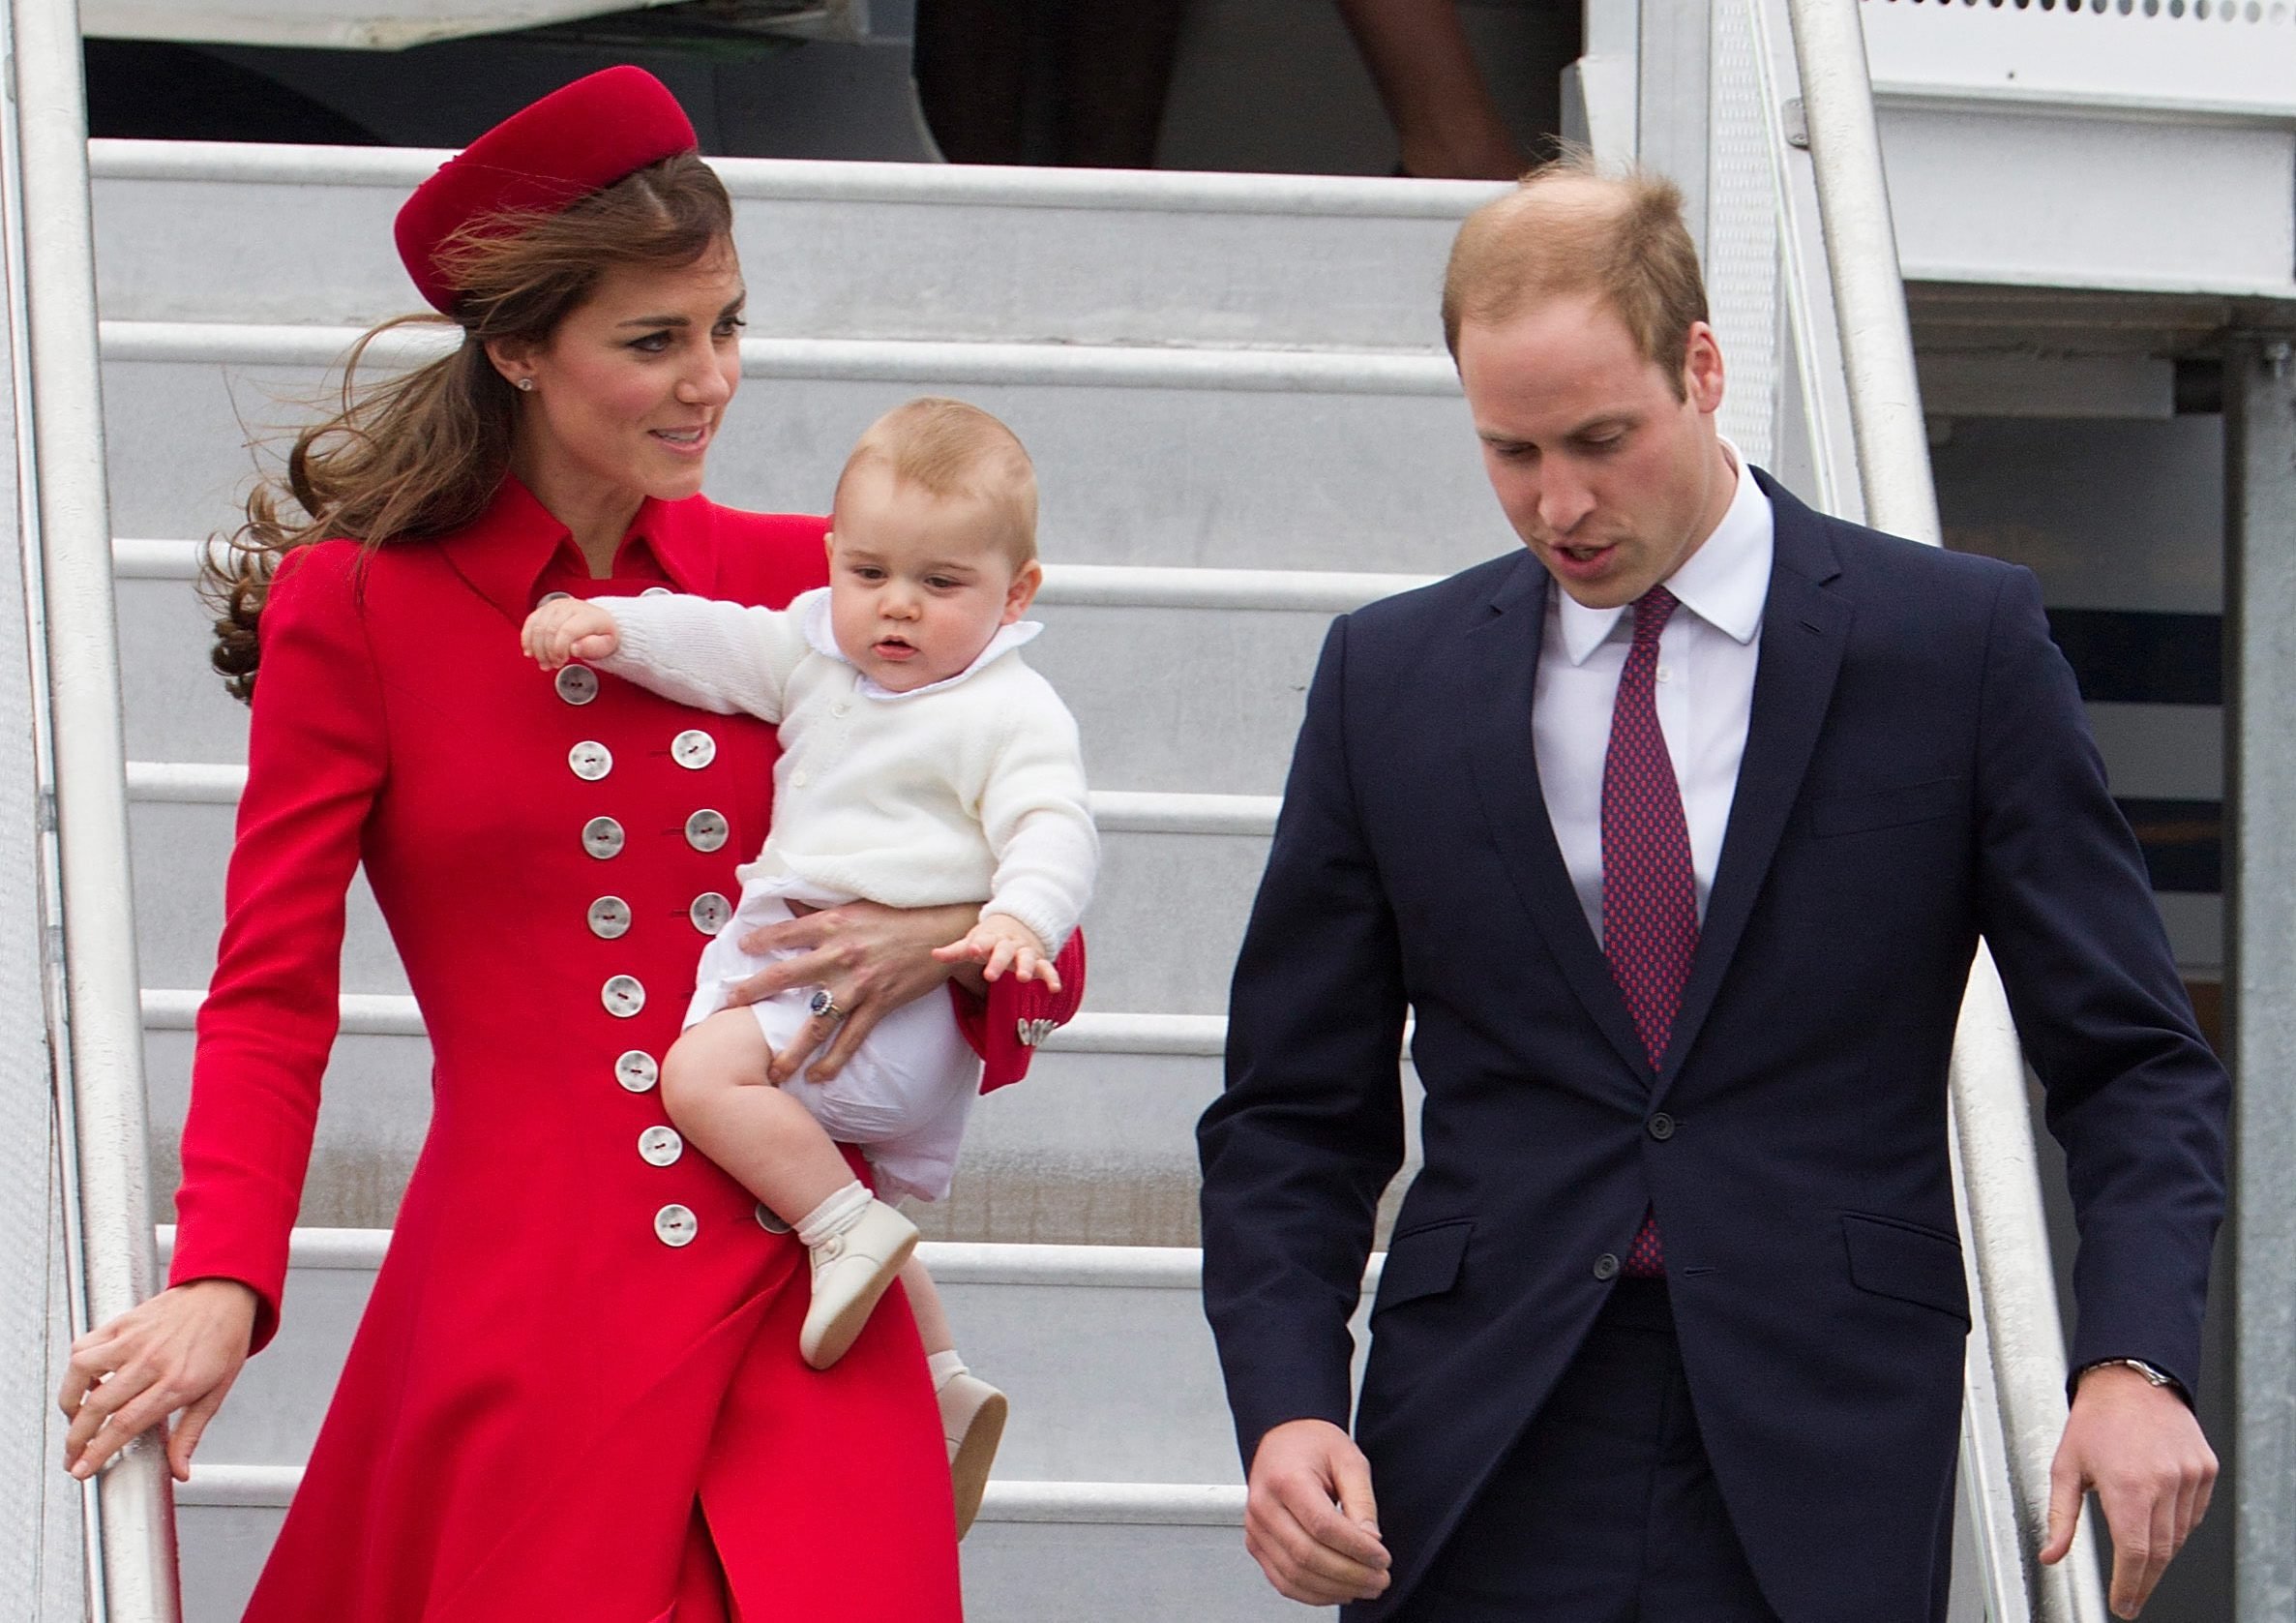 From right: Britain's Prince William, Duke of Cambridge and his wife Catherine, Duchess of Cambridge, carrying baby Prince George, arrive at Wellington Military Terminal, in Wellington, New Zealand, on April 7, 2014. (EPA)